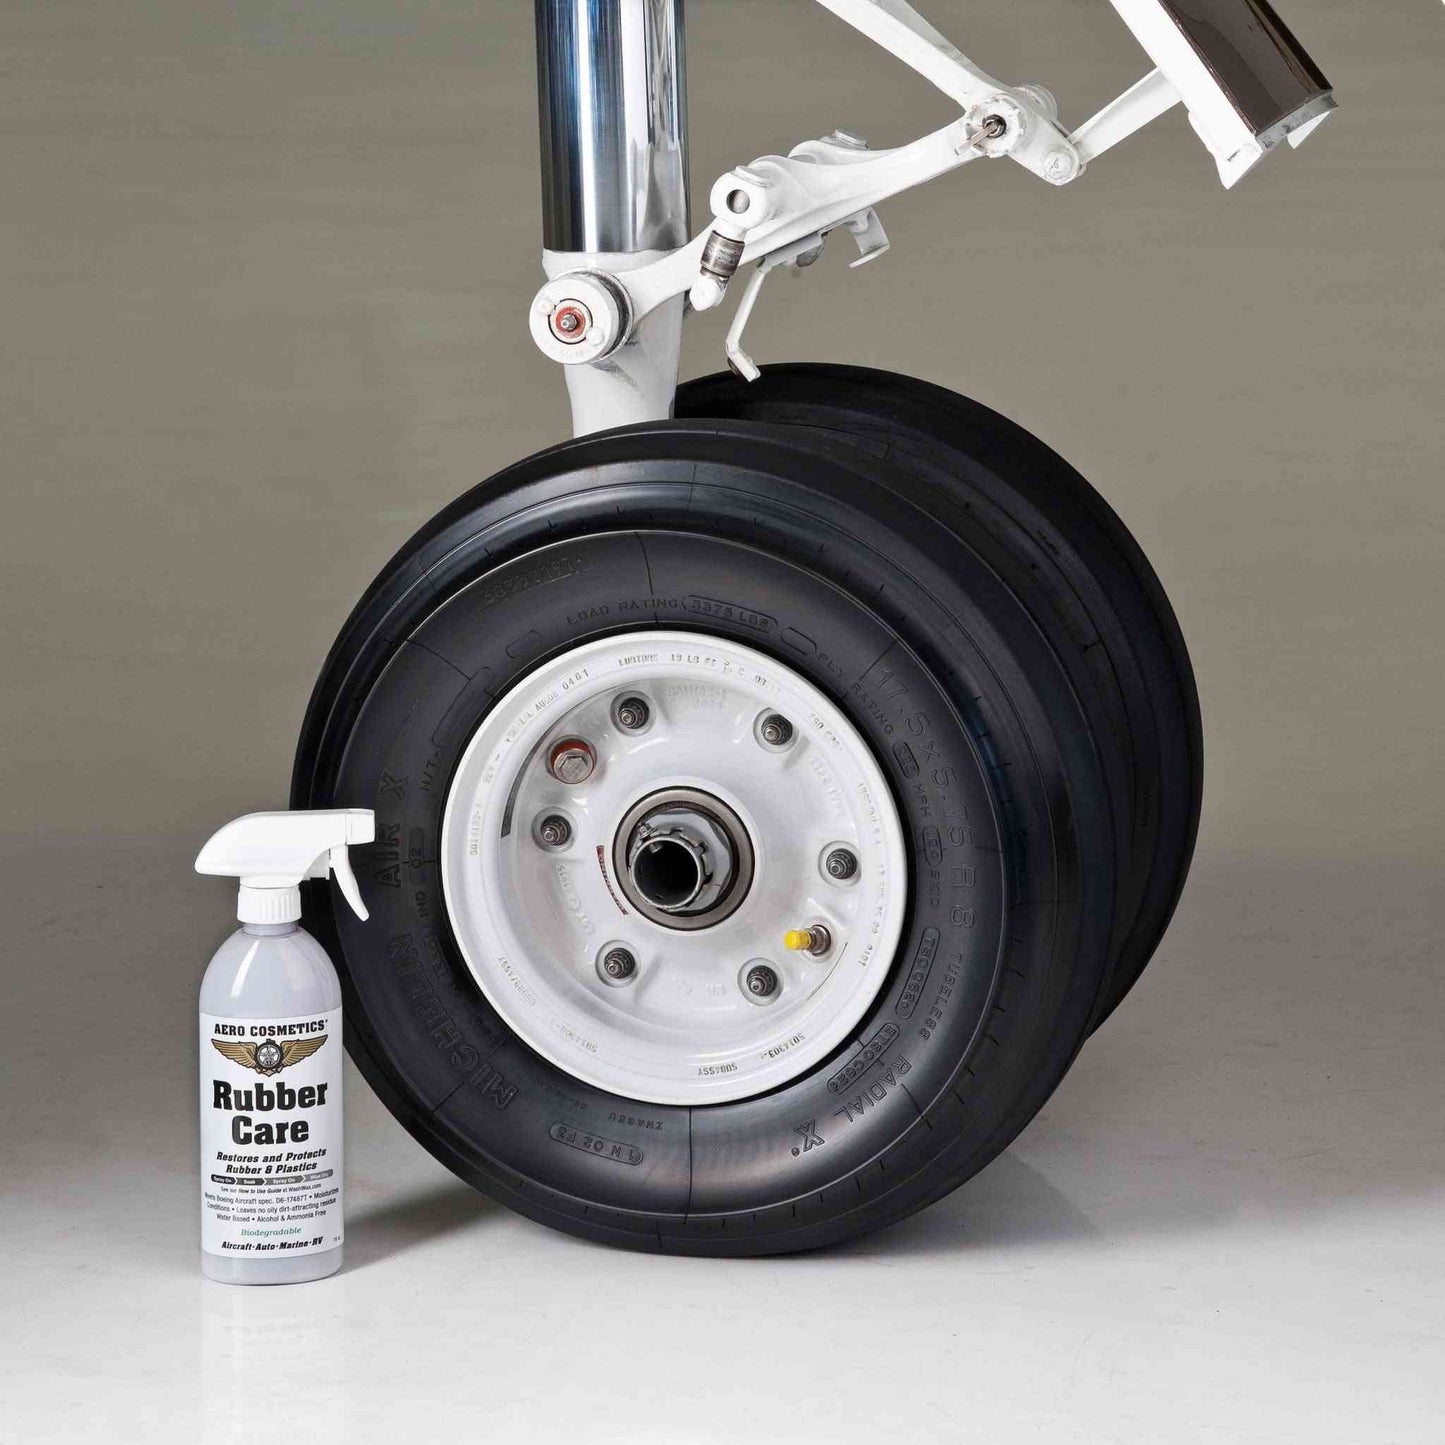 Tire Care Kit, Aircraft Quality Products for your Car, RV and Motorcycle Aero Cosmetics